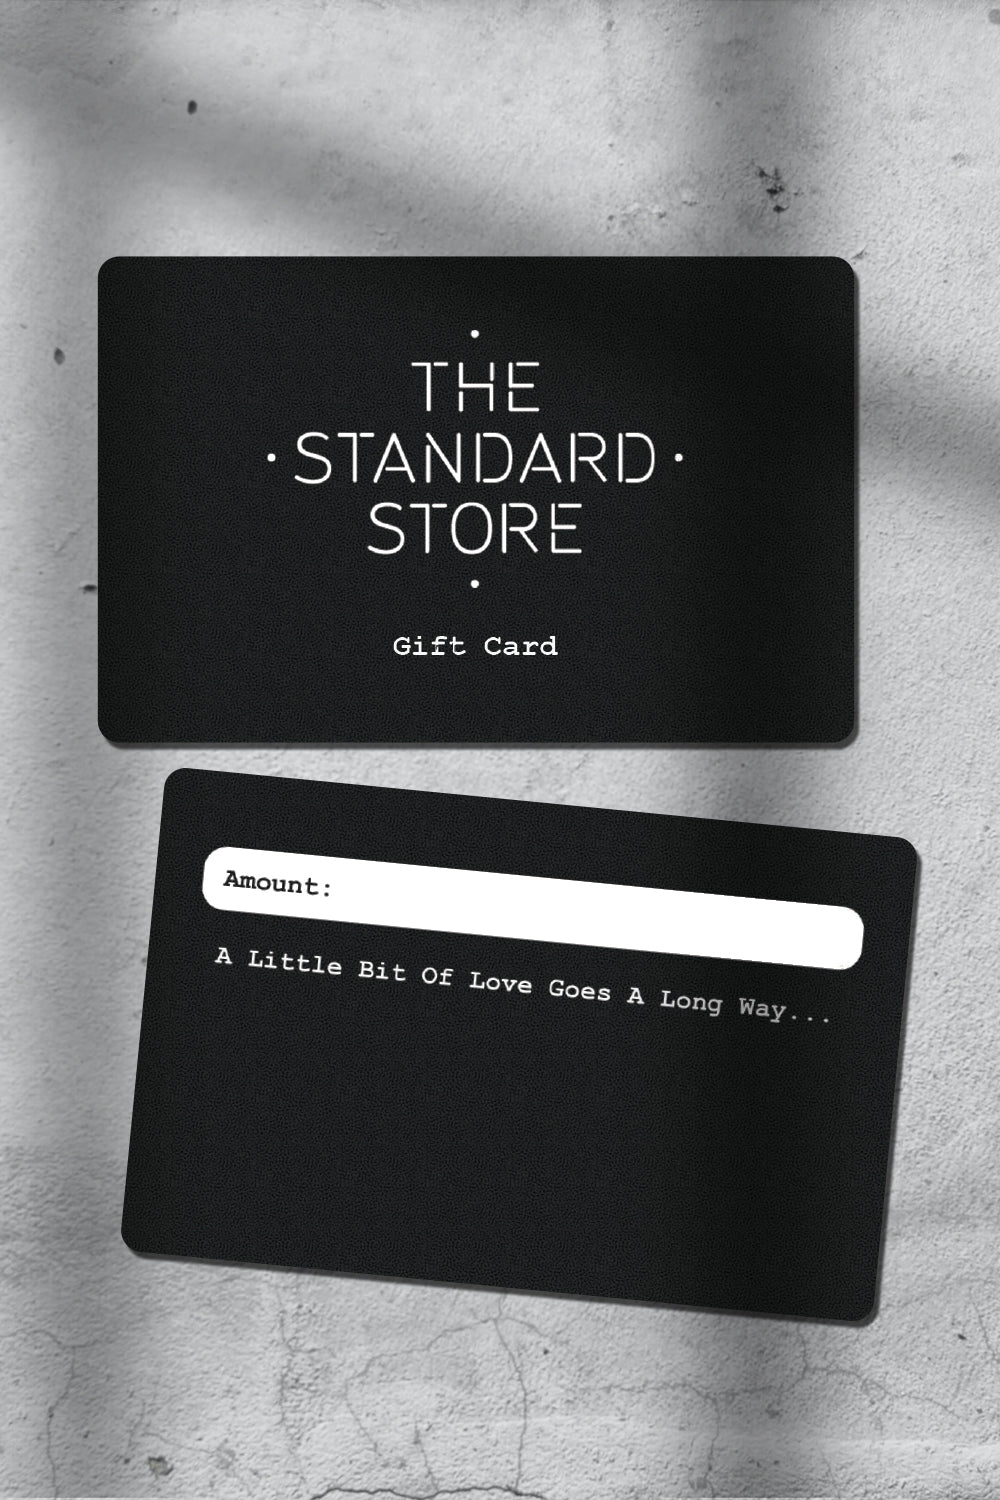 The Standard Store gift card - The Standard Store